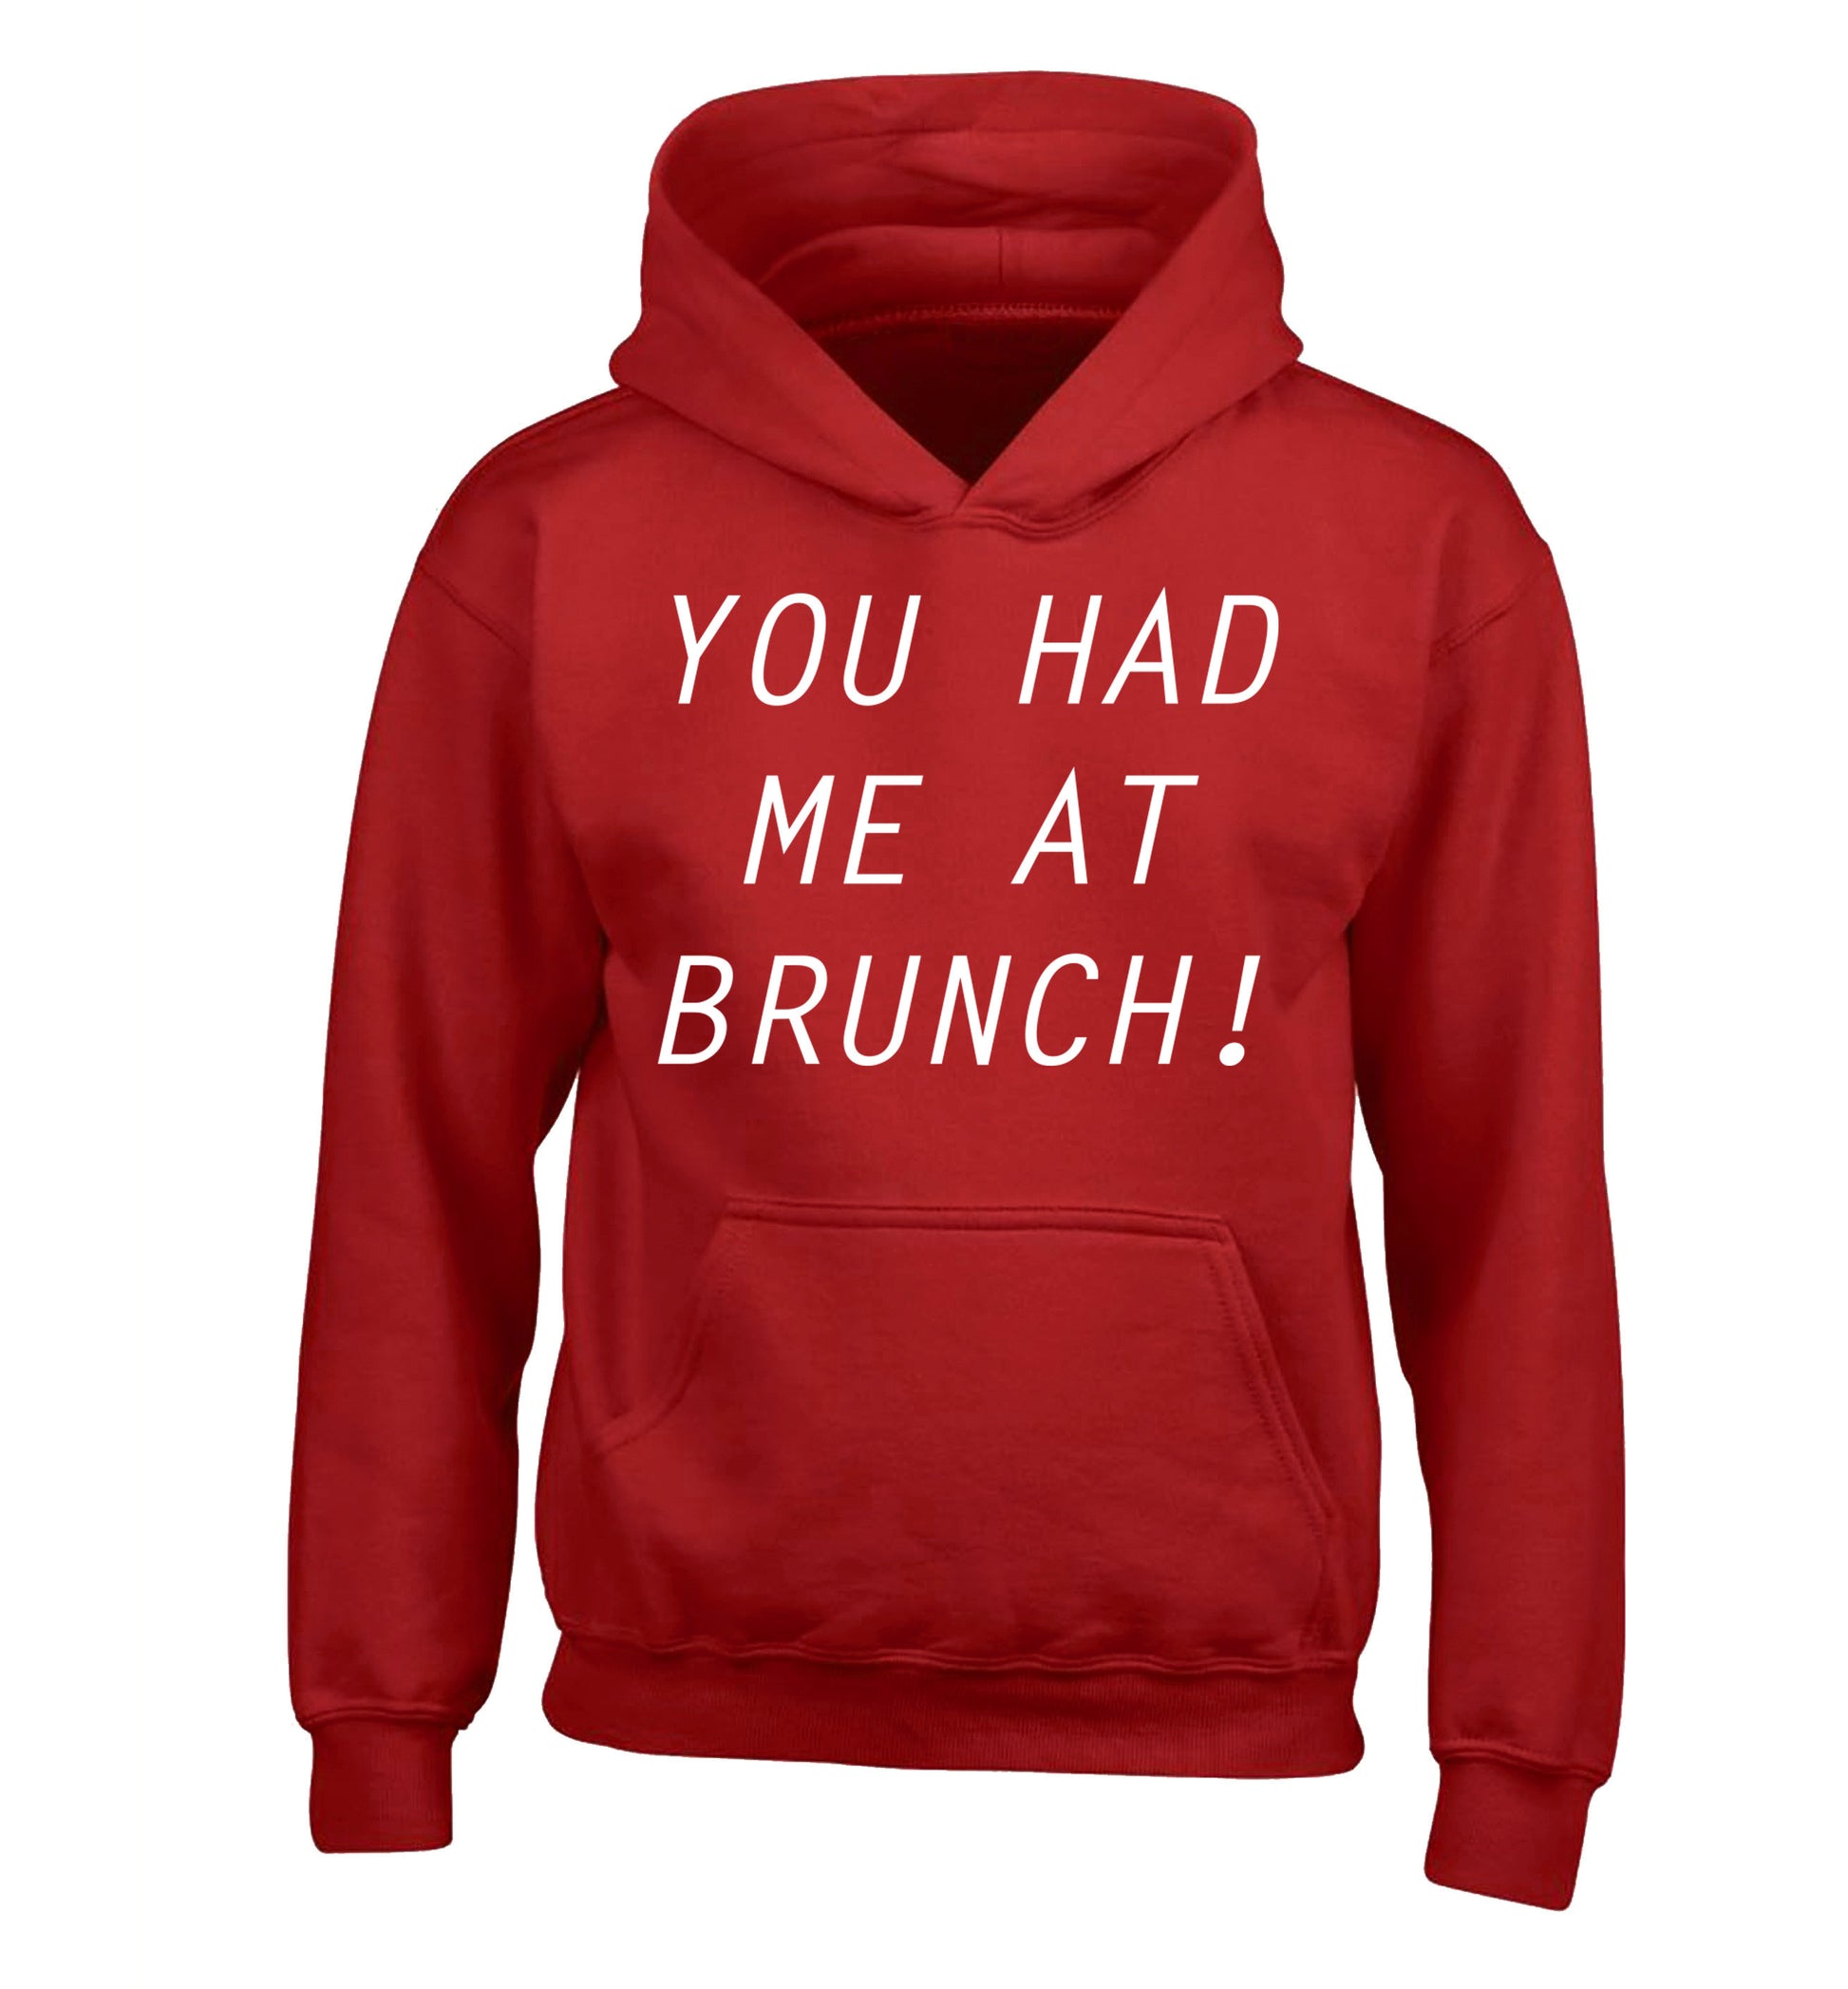 You had me at brunch children's grey sweater 12-14 Years